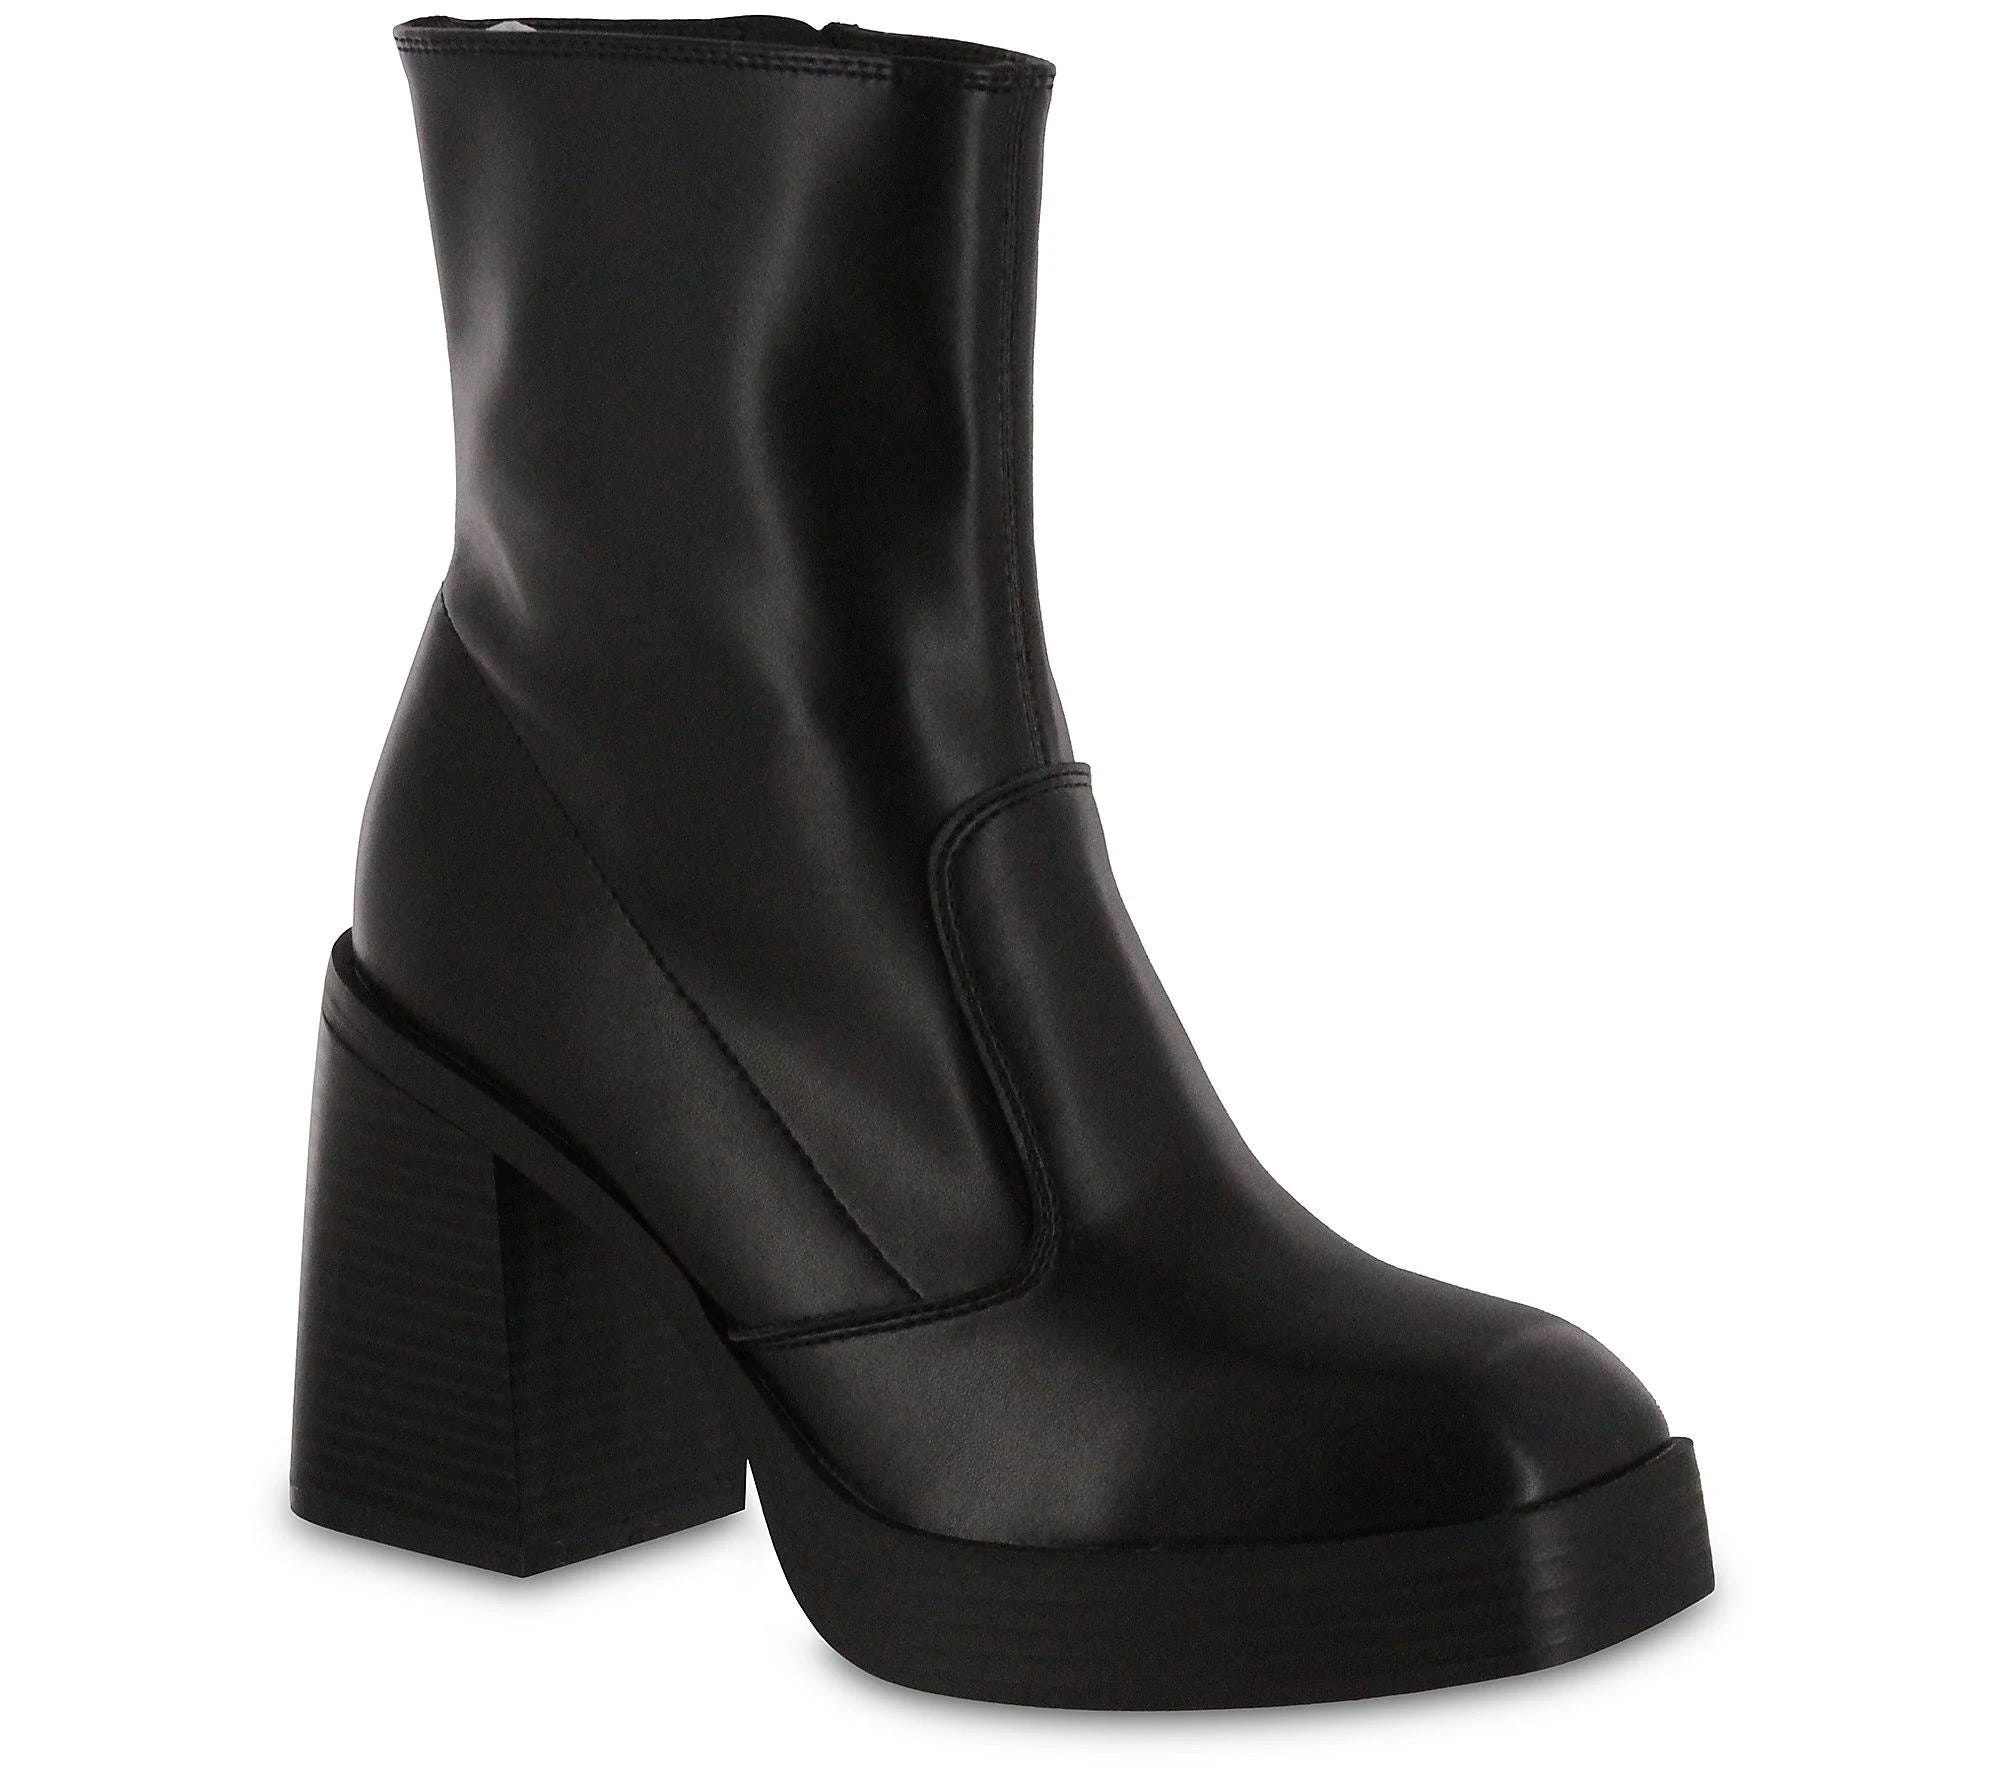 Black Faux Leather Odie Platform Bootie (Size 10) from Nordstrom | Image